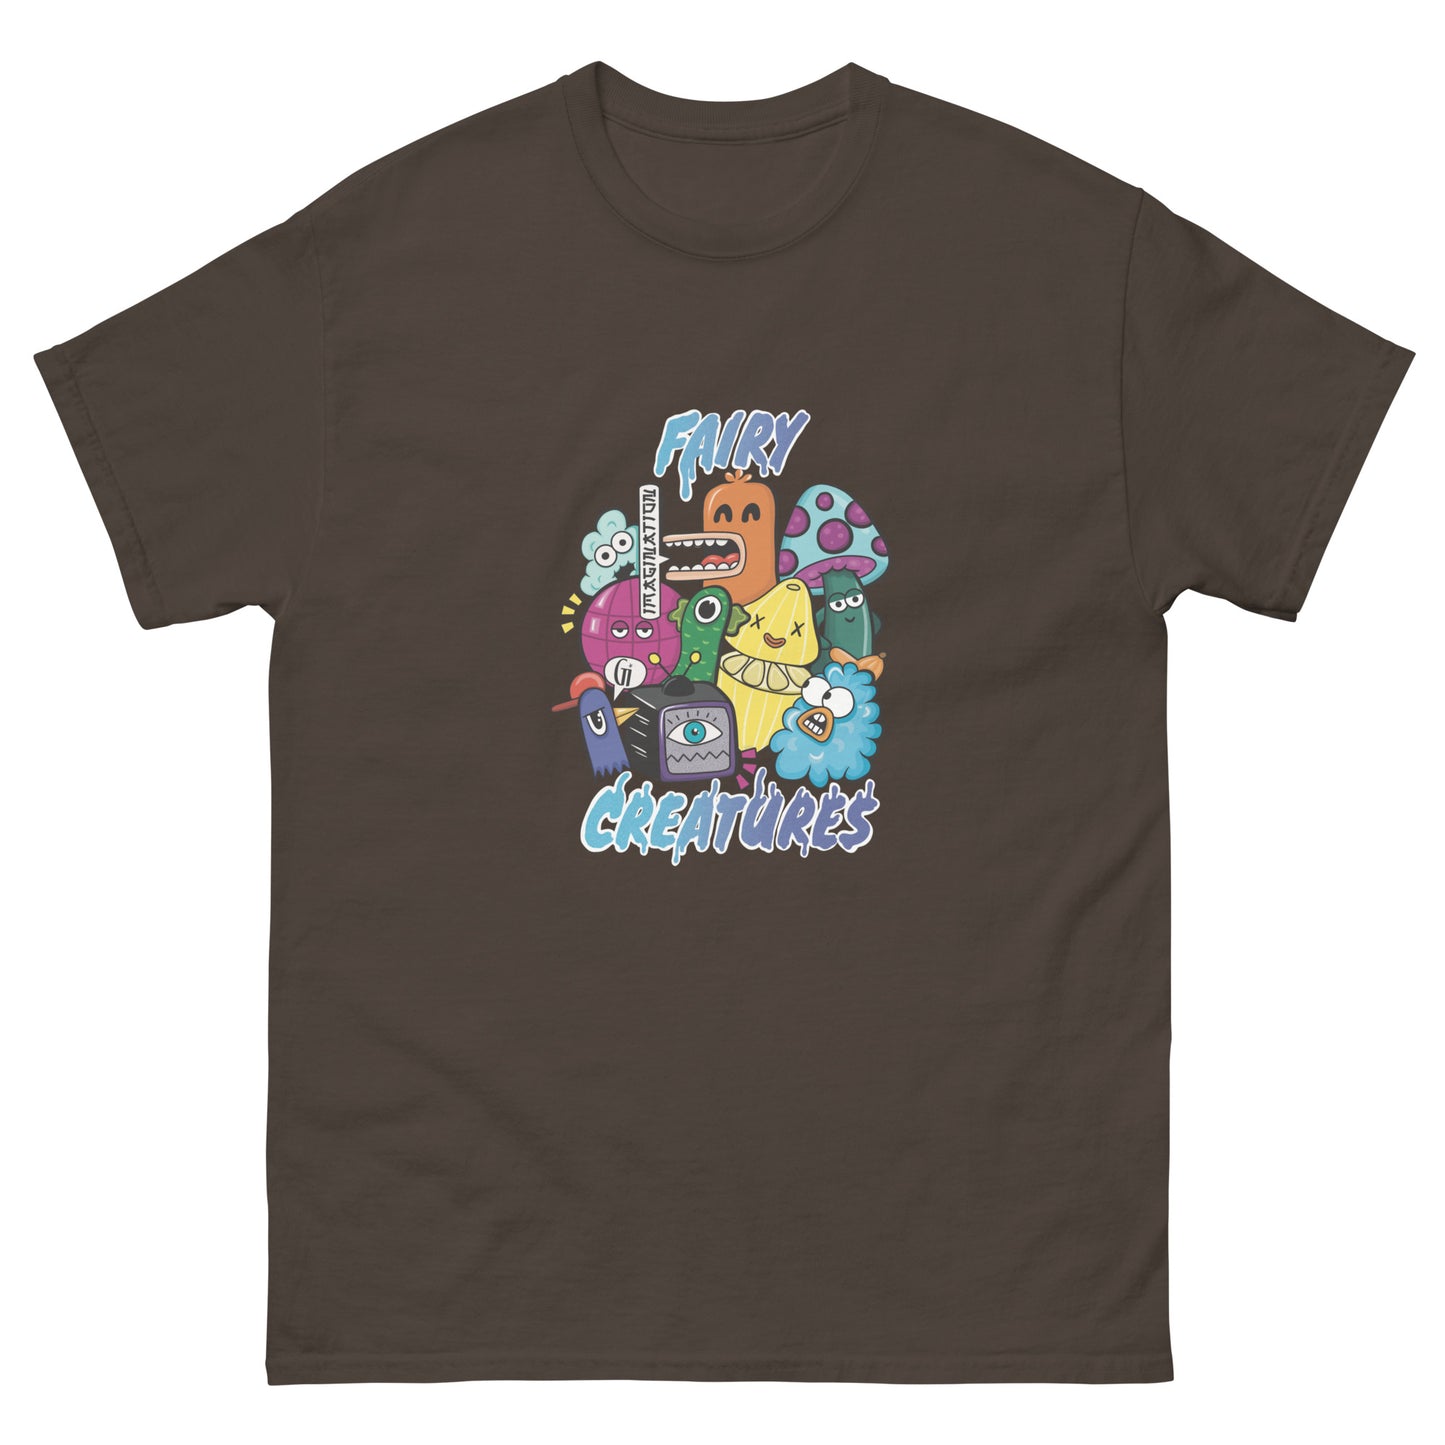 chocolate color cotton t shirt with fairy creatures